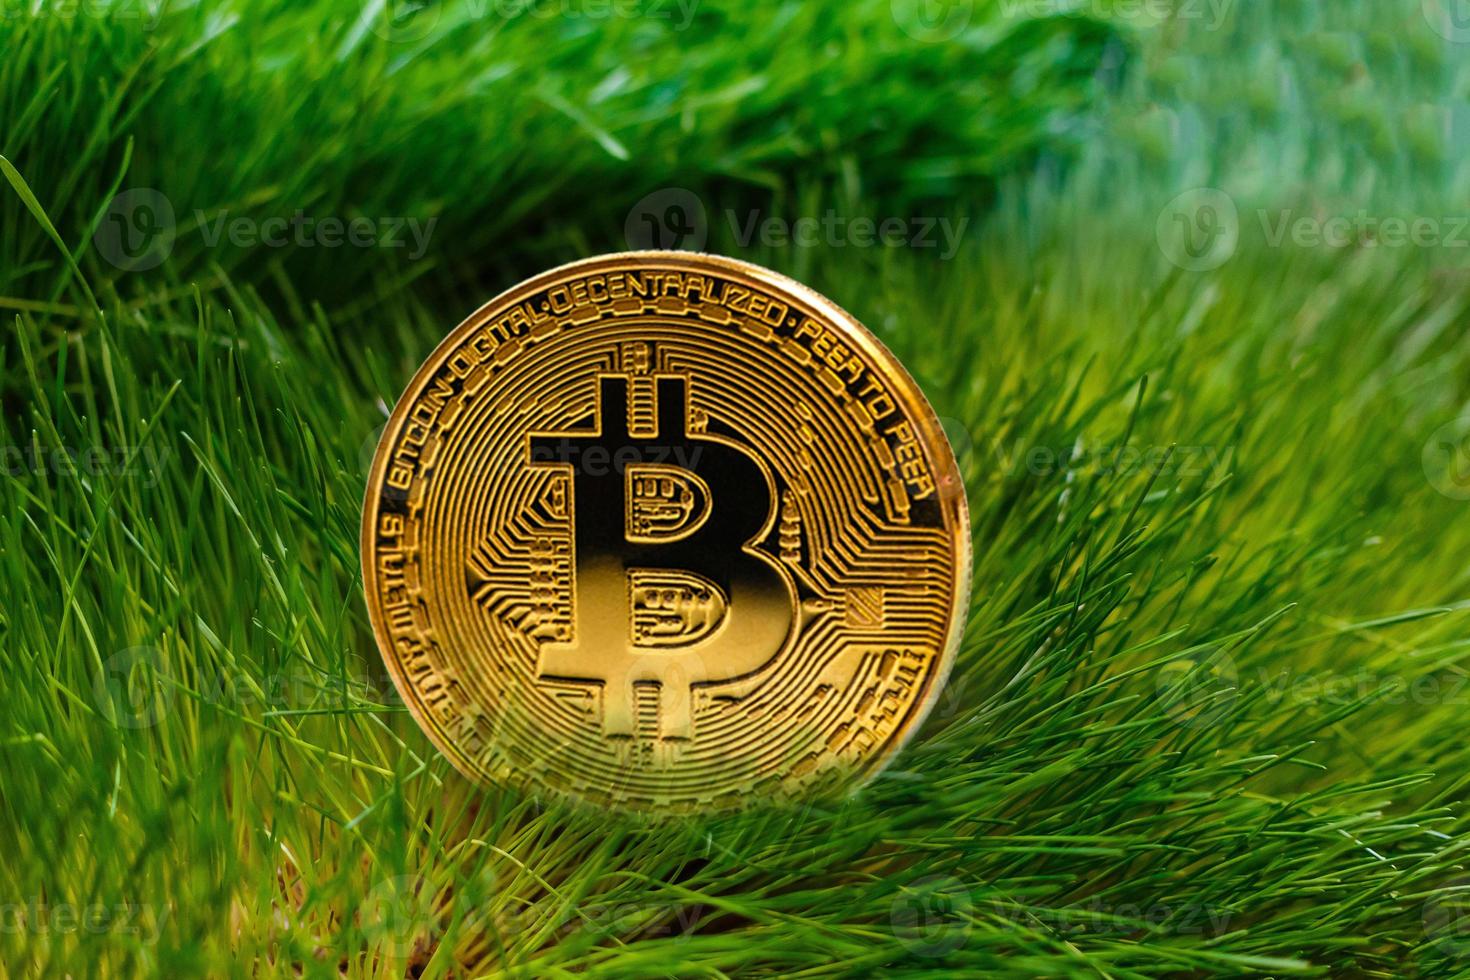 One gold bitcoin coin on a background of grass photo